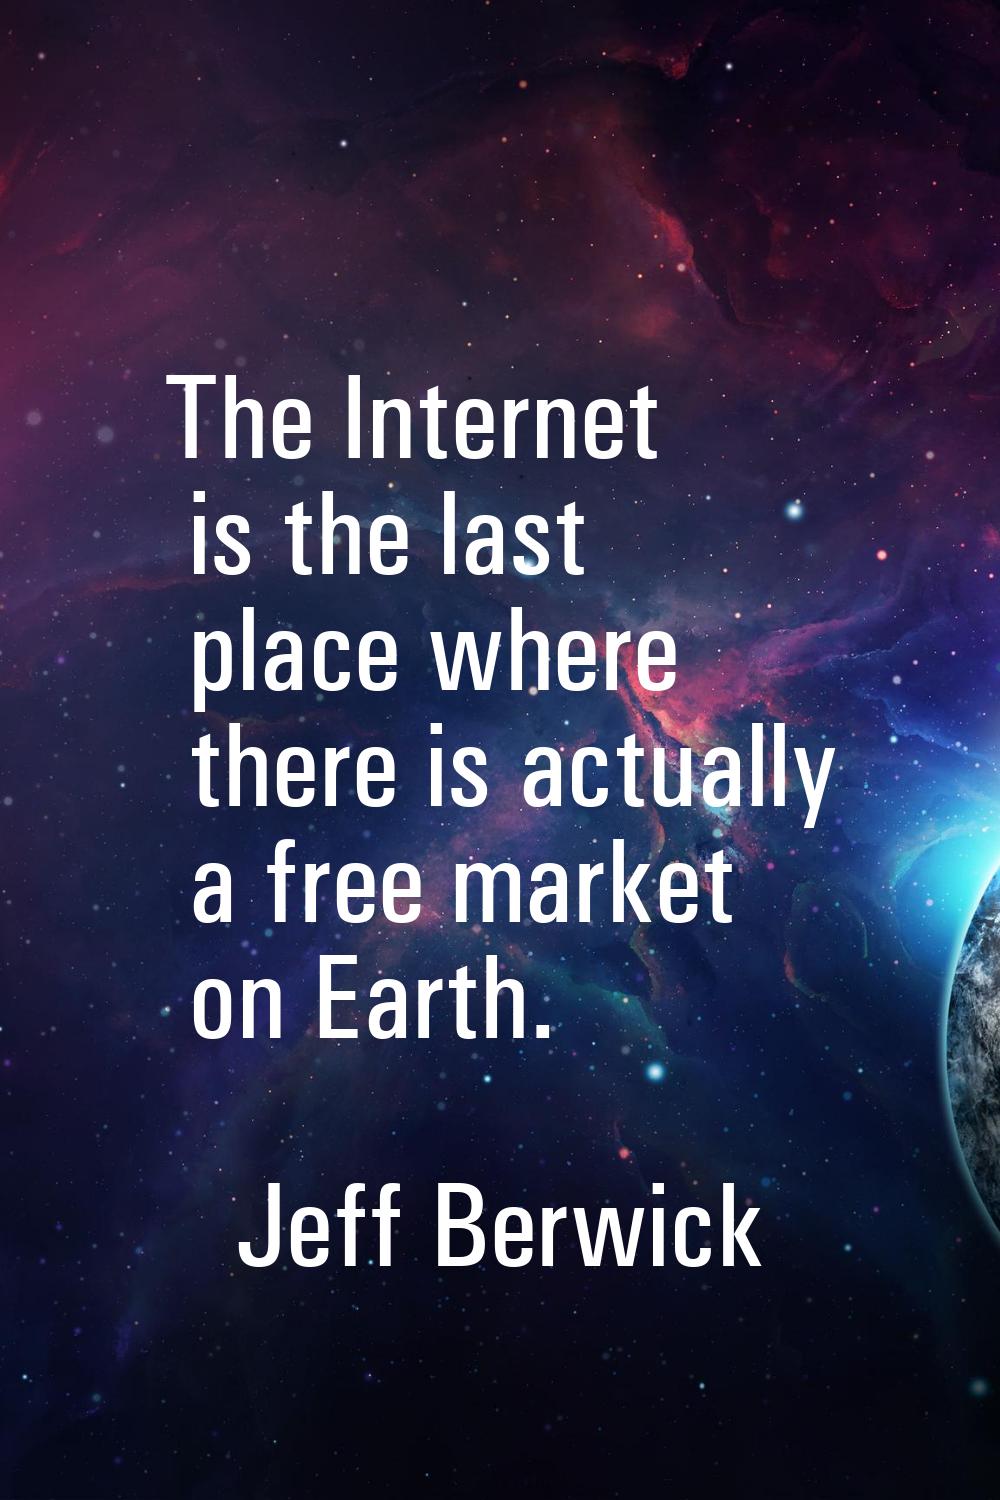 The Internet is the last place where there is actually a free market on Earth.